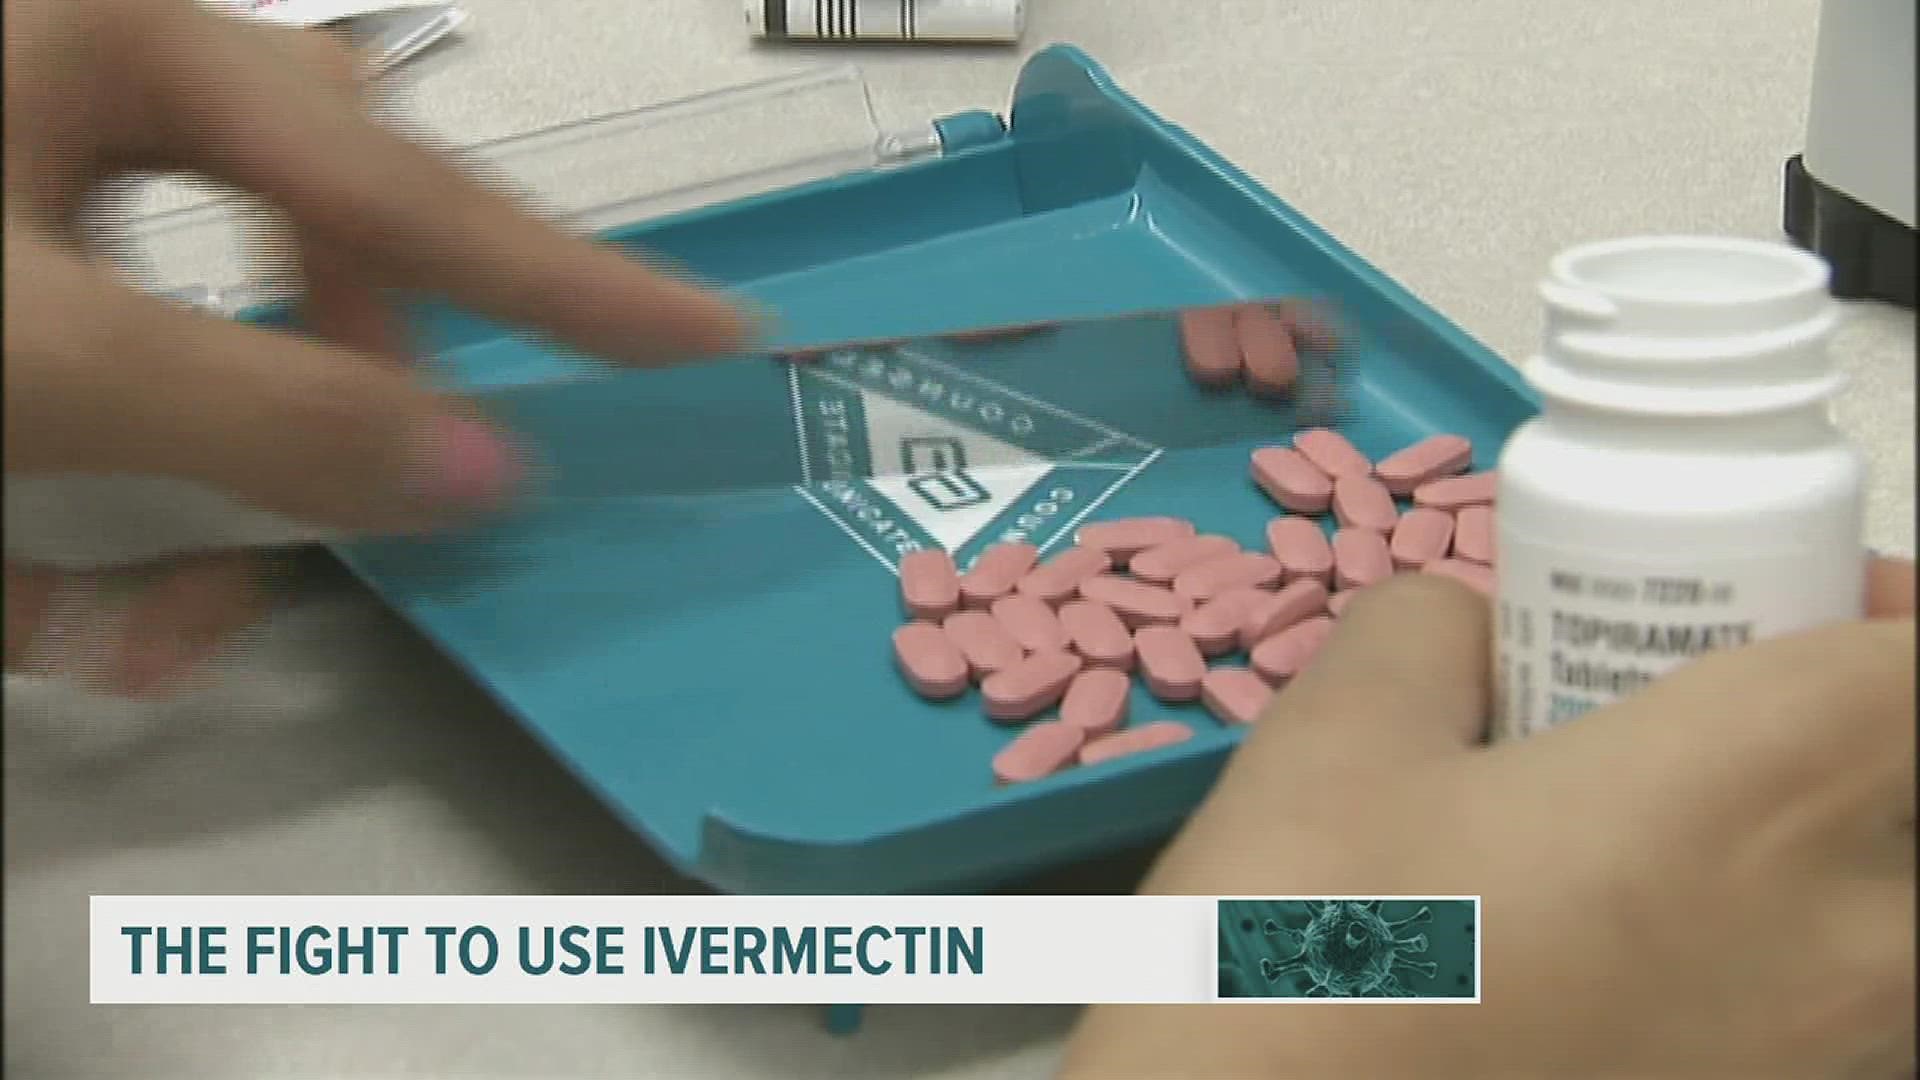 More people are filing lawsuits nationwide seeking to have hospitals treat their loved ones battling COVID-19 with ivermectin.